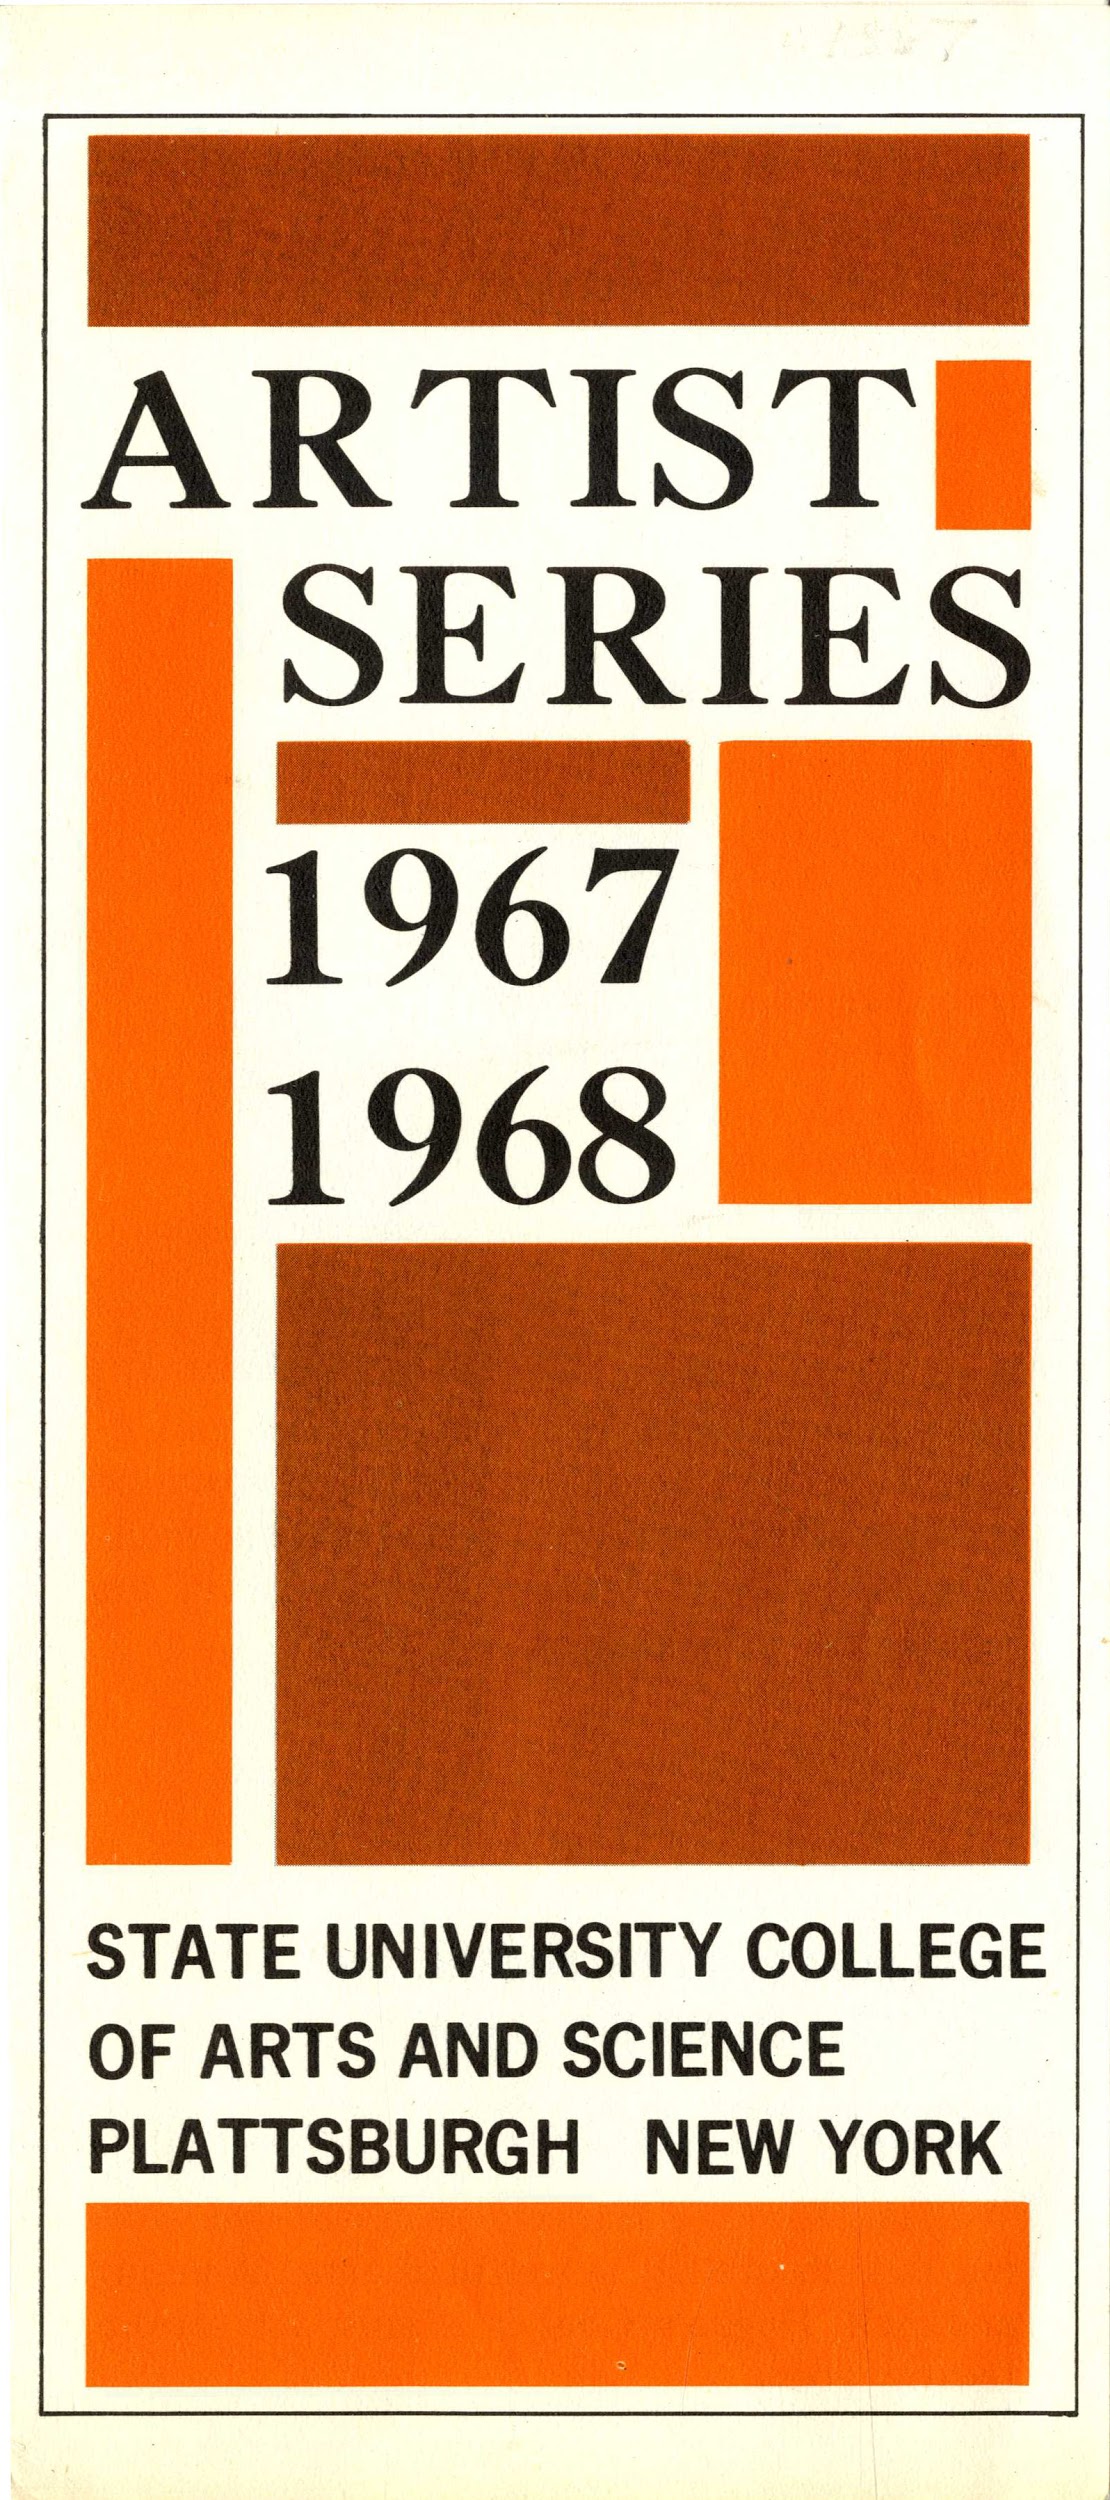 Artist Series 1967-1968. State University College of Arts and Science, Plattsburgh, New York